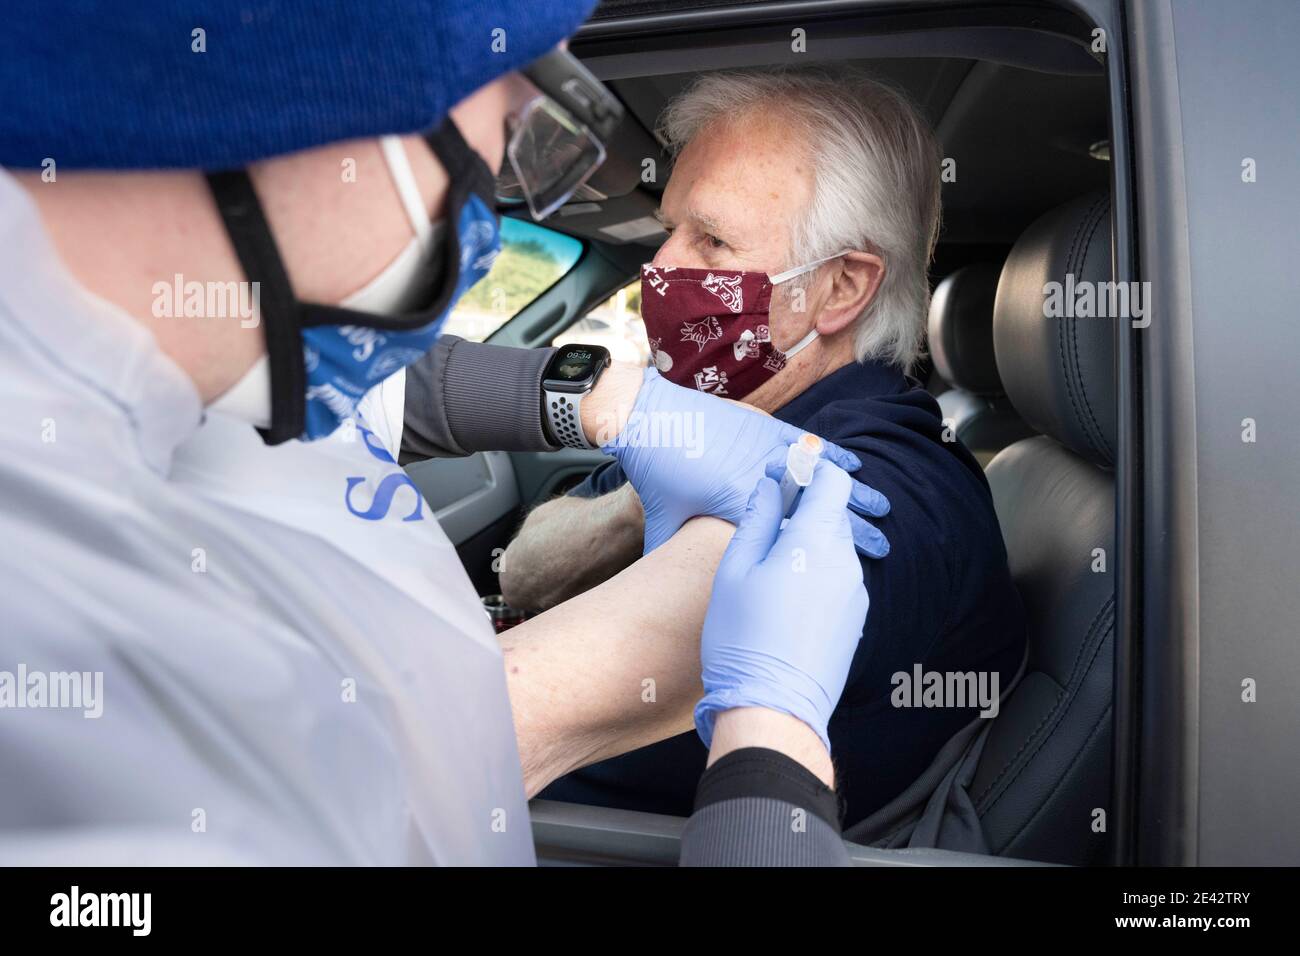 Round Rock, USA. 21st Jan, 2021: South University nursing student Zach Beyer administers the COVID-19 vaccine to Ed McMenemy at a drive-through clinic. More than 2,000 doses were given in people's arms at the clinic on the previous day as Texas ramps up its vaccine response. Credit: Bob Daemmrich/Alamy Live News Stock Photo